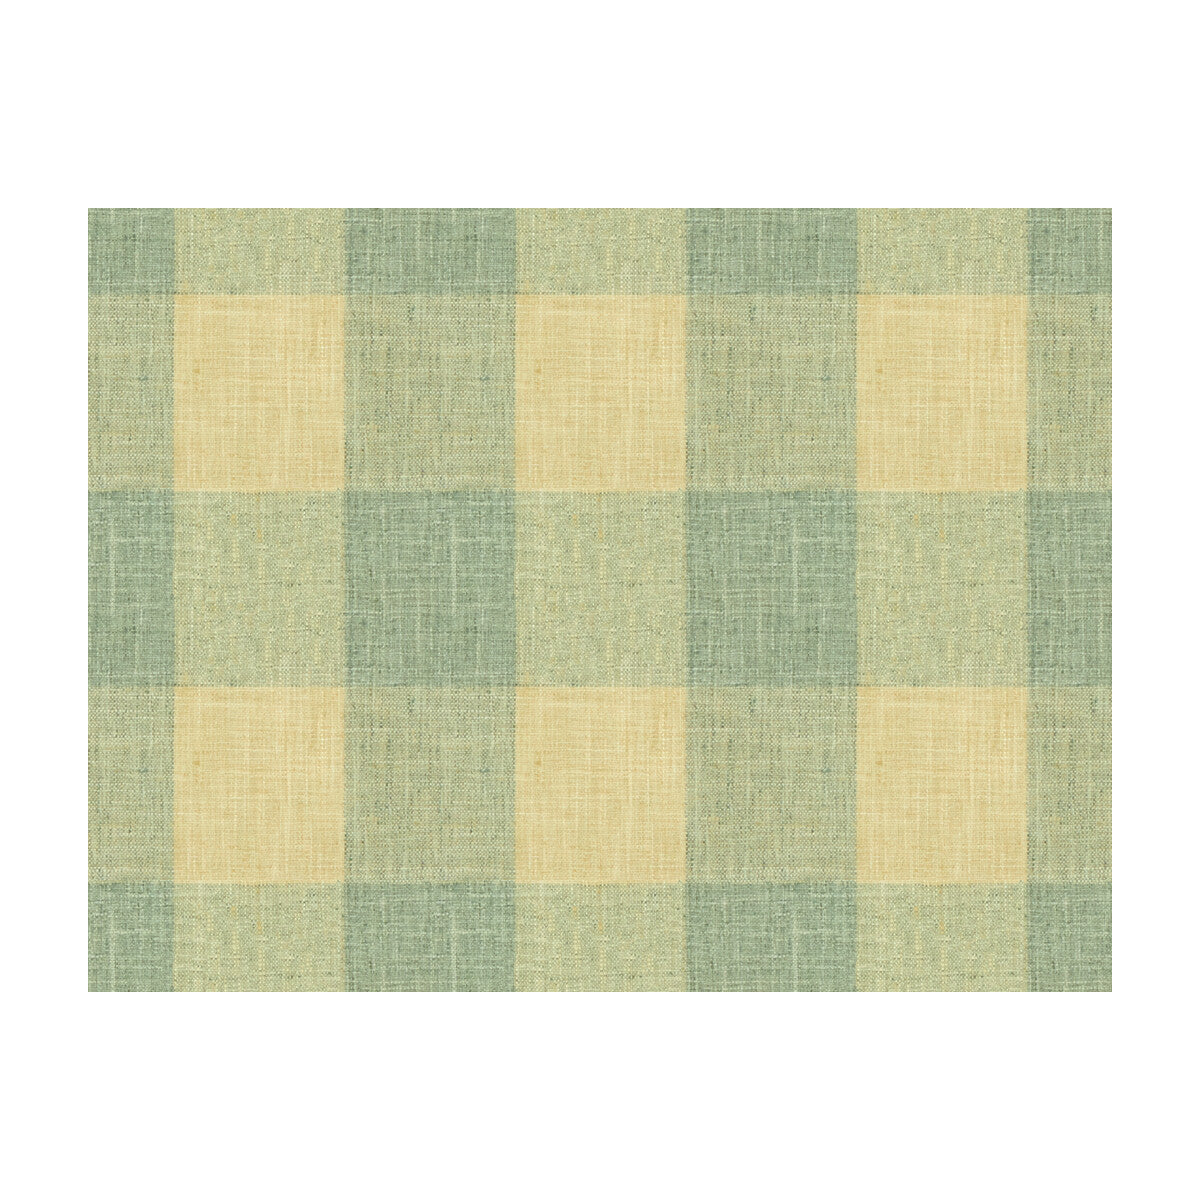 Kravet Basics fabric in 34090-1516 color - pattern 34090.1516.0 - by Kravet Basics in the Bungalow Chic II collection